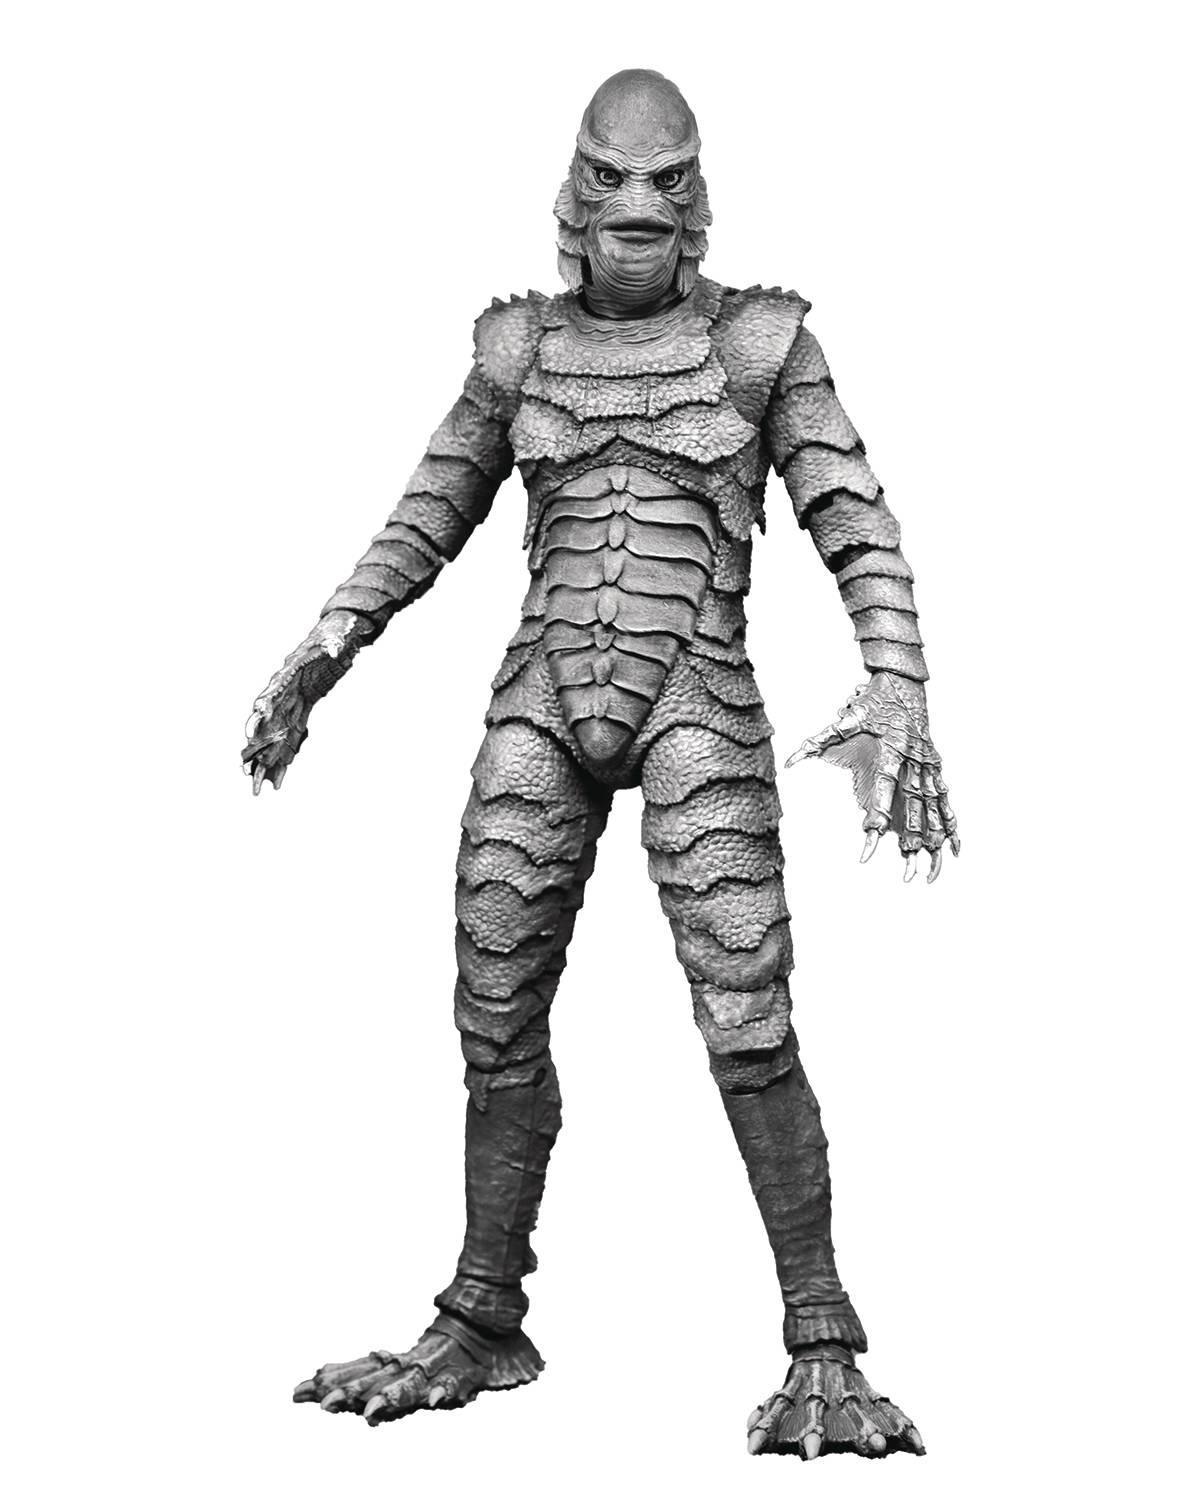 UNIVERSAL MONSTERS ULTIMATE CREATURE FROM THE BLACK LAGOON AF - Kings Comics